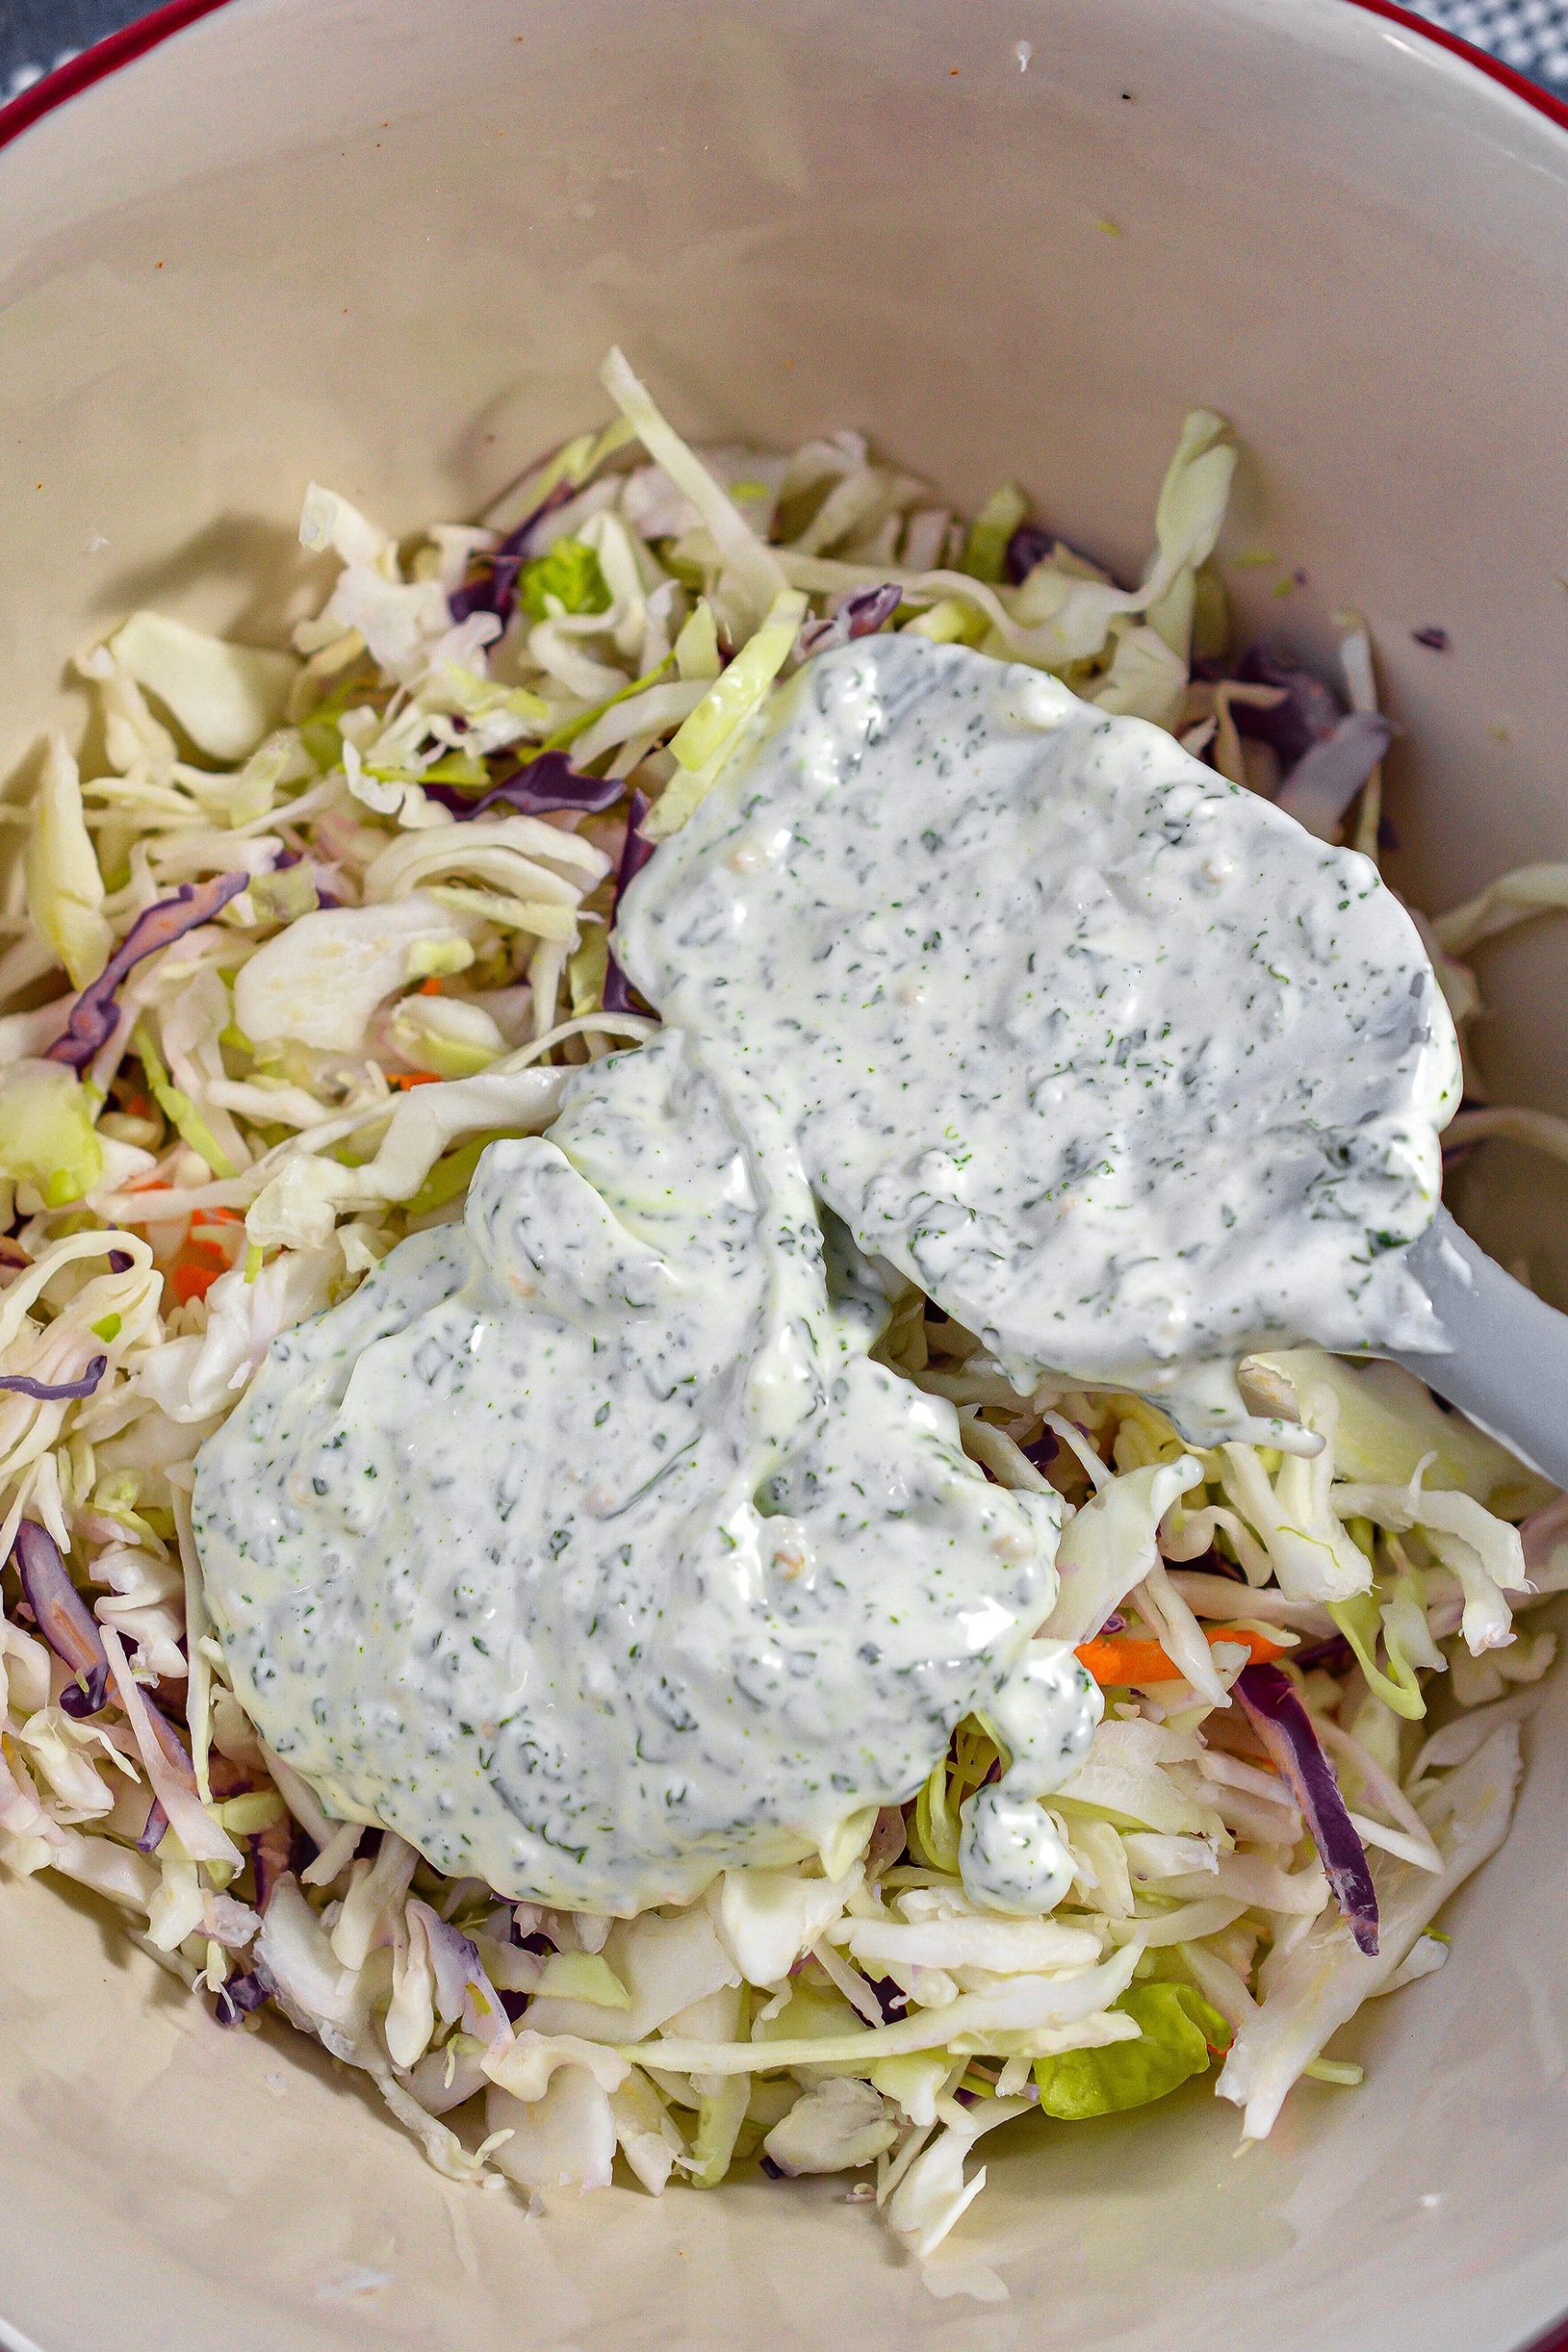 In another bowl, place some of the dressing on the coleslaw mix, and stir to combine well.